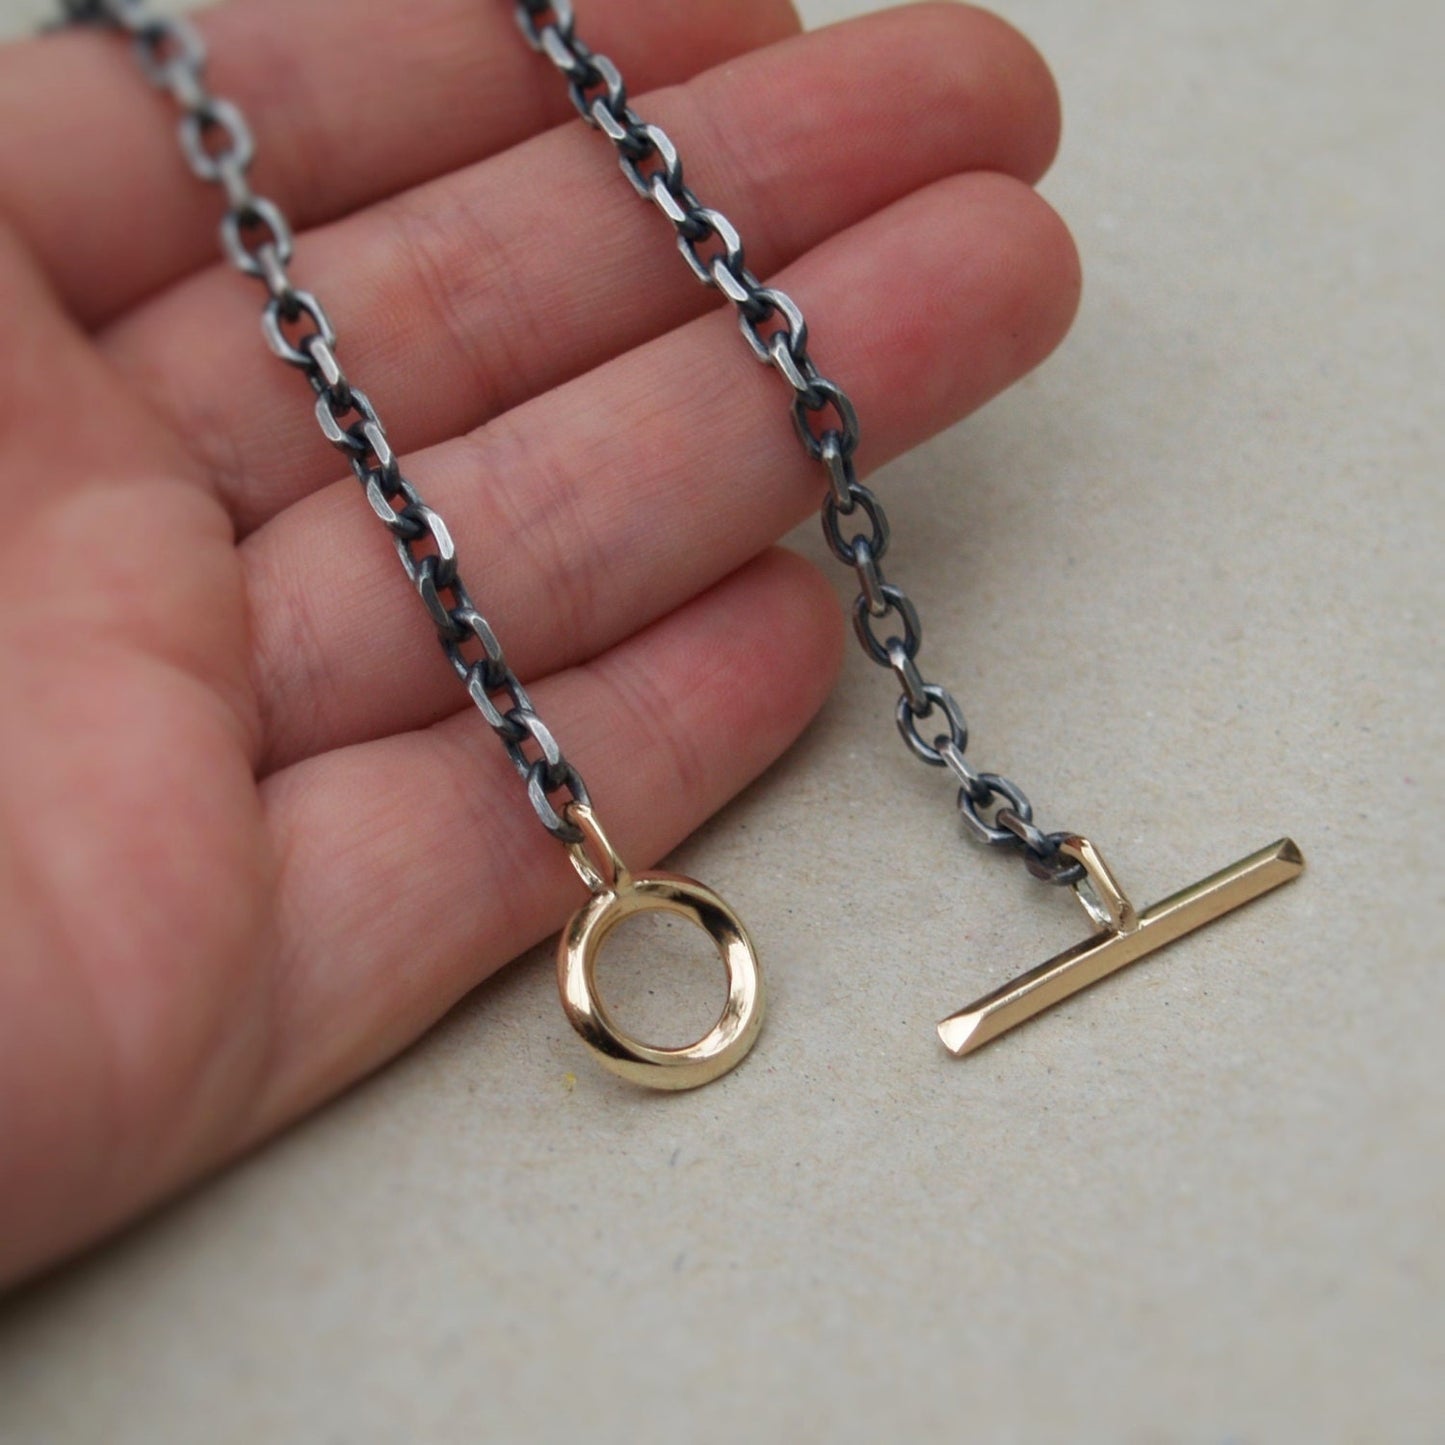 Handmade to order - Oxidised or polished solid silver 4.2mm wide diamond cut trace chain with a unique handmade 9ct yellow gold T-bar